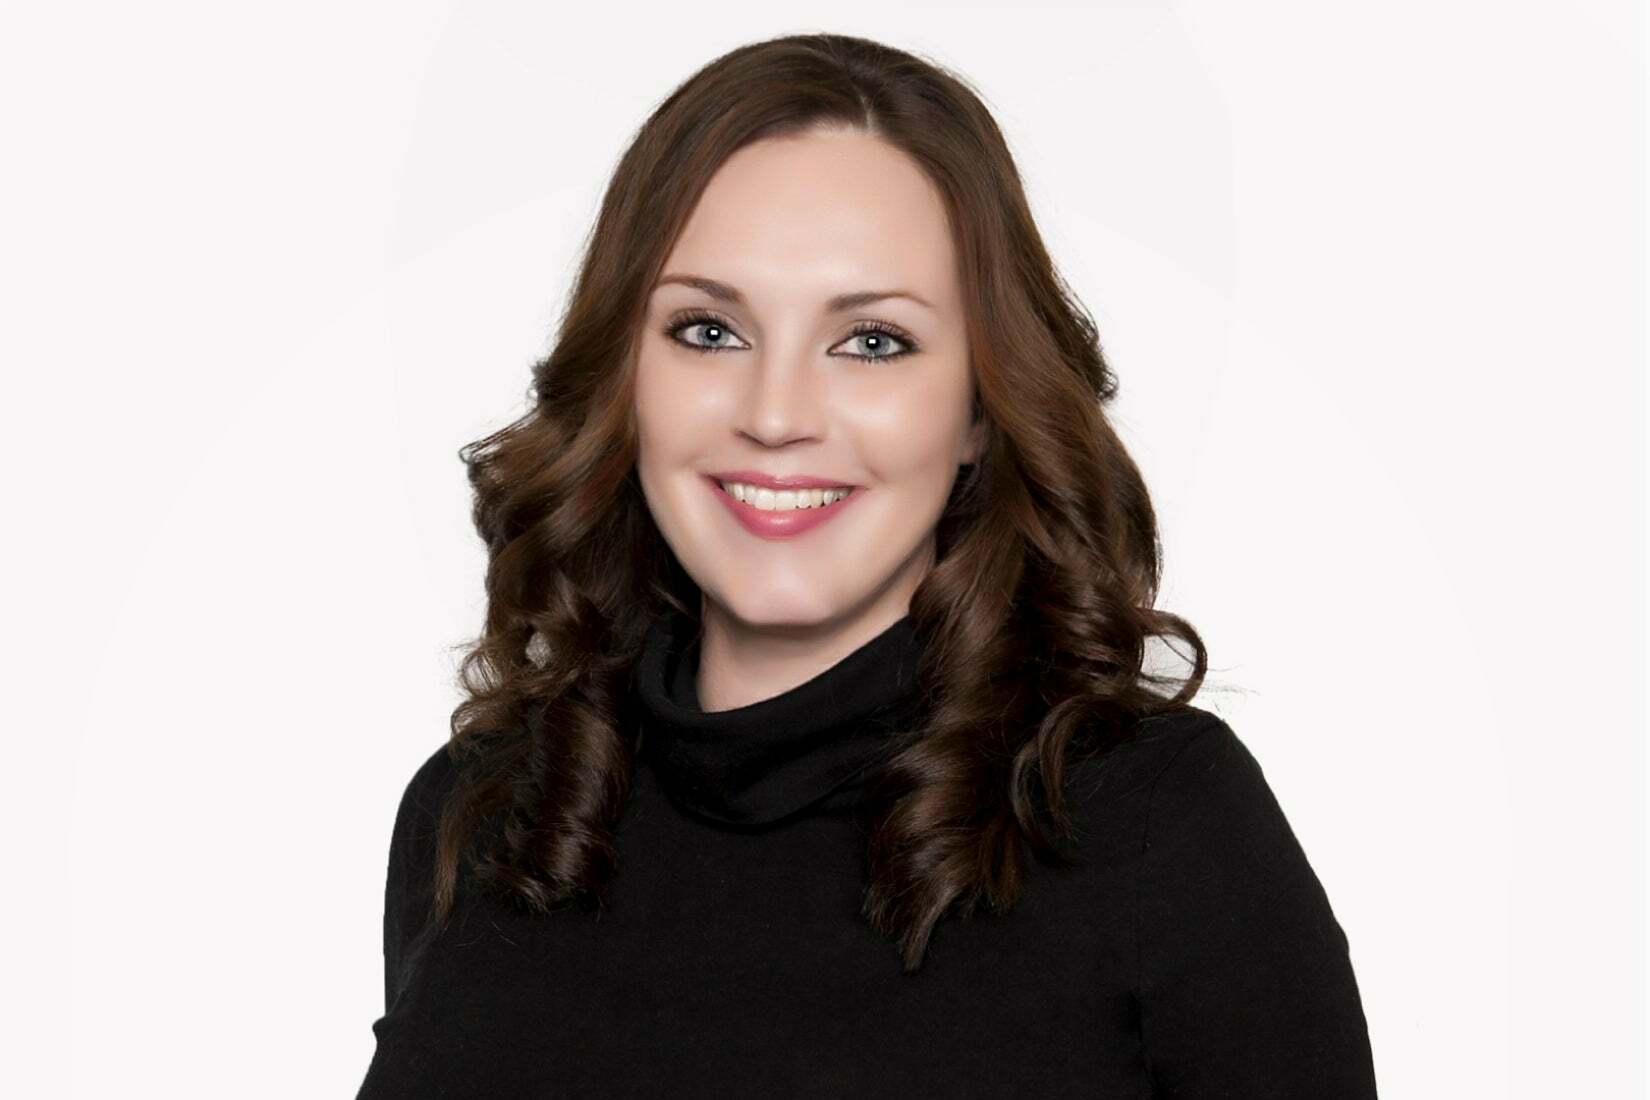 Lauren Boccelli, Real Estate Salesperson in North Reading, North East